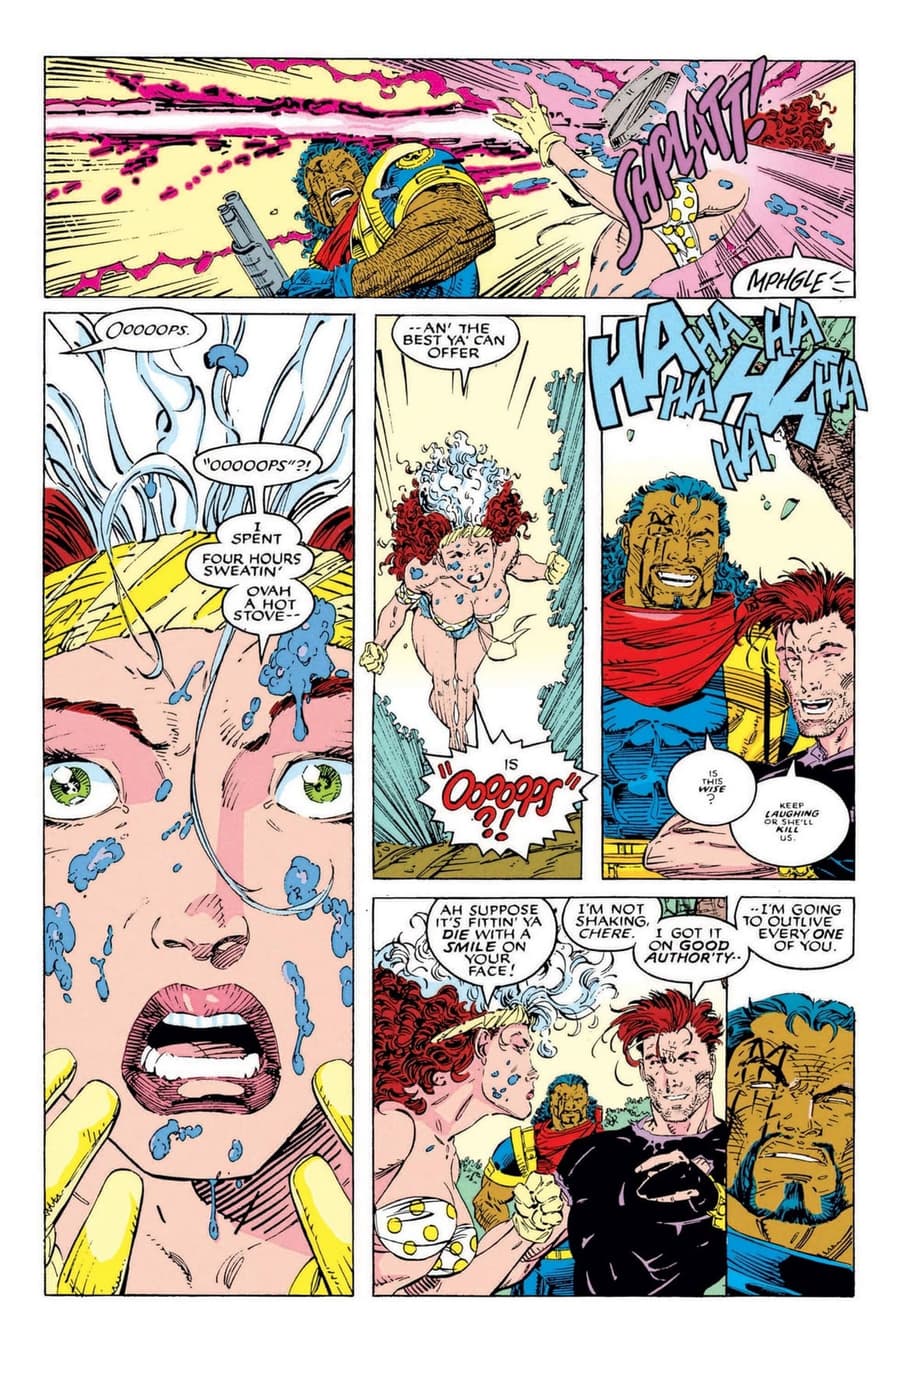 X-MEN (1991) #8 page by Jim Lee and Scott Lobdell